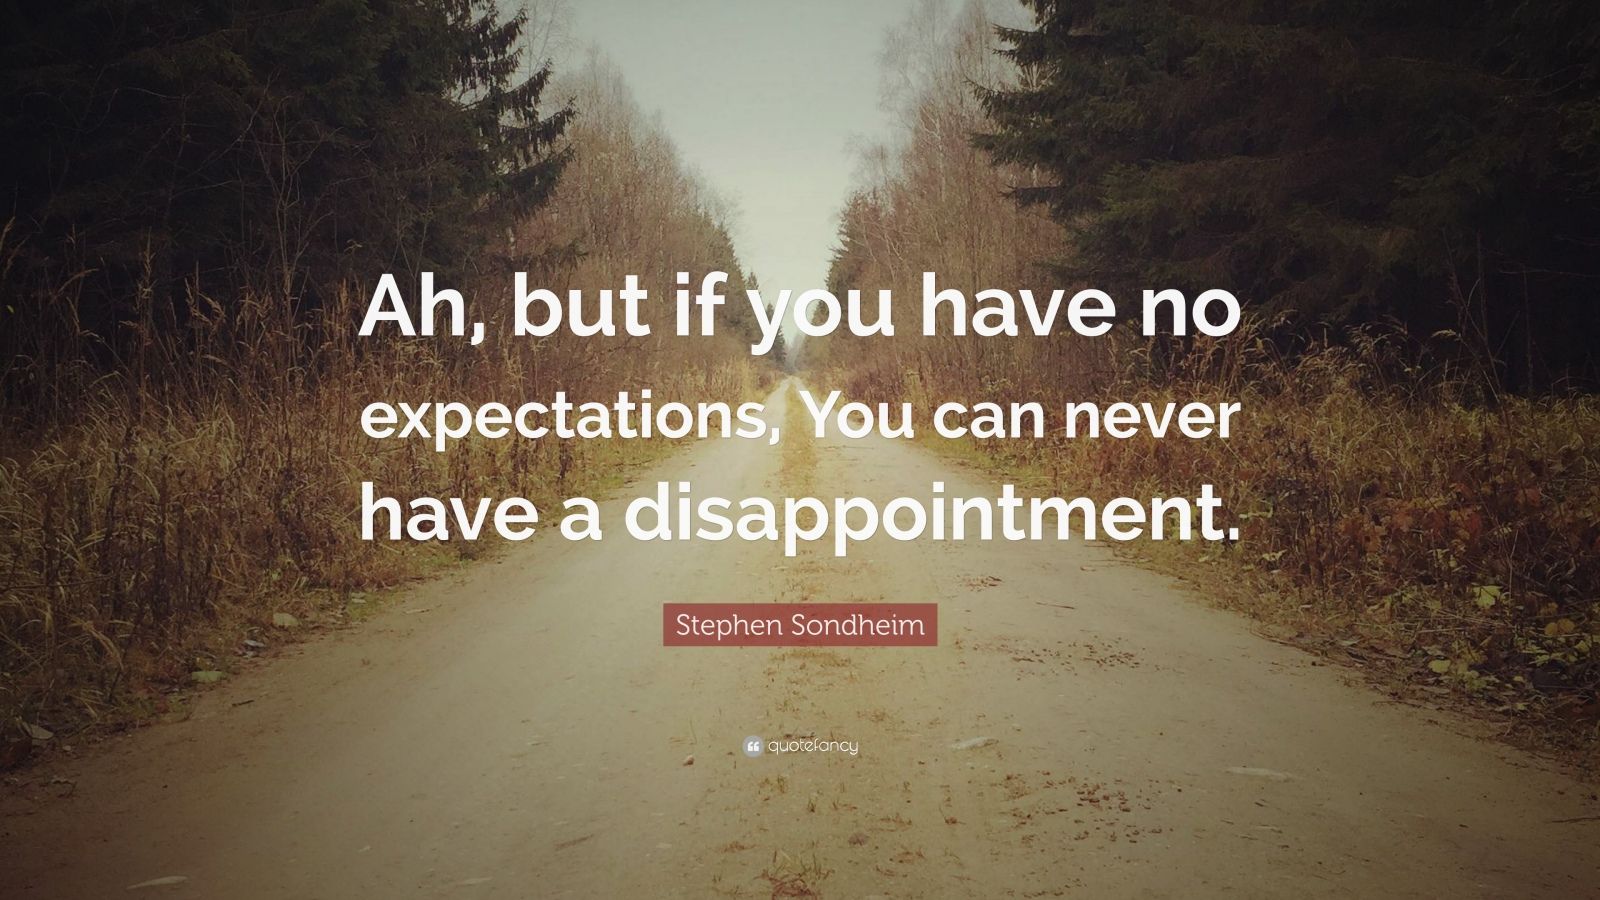 Stephen Sondheim Quote “Ah, but if you have no expectations, You can